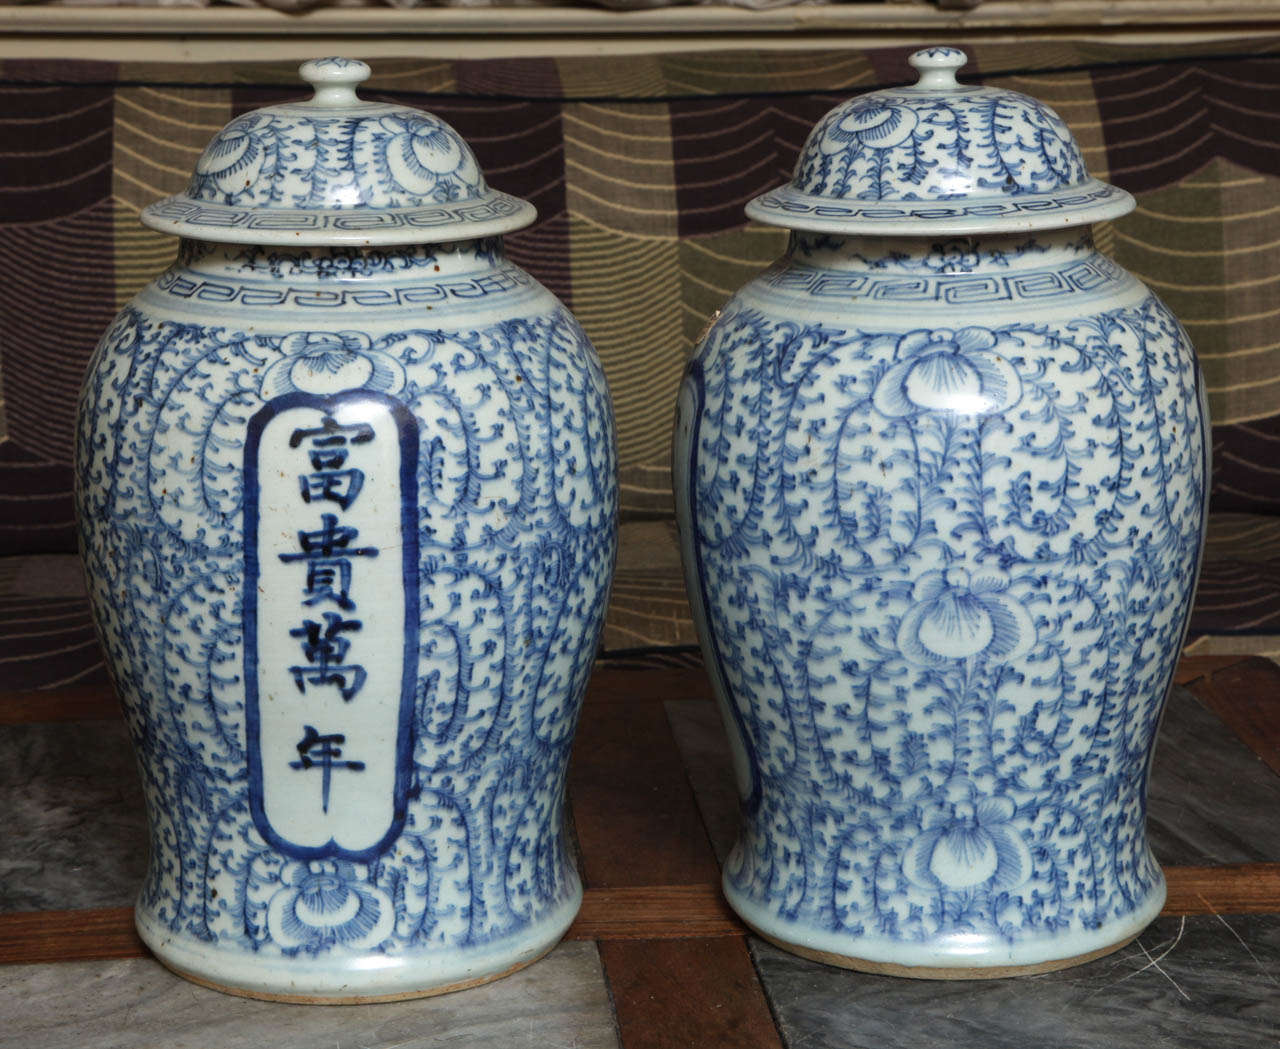 A rare pair of Chinese temple jars with Chinese characters, and original lids.
in excellent original condition. One of the rarest patterns in Chinese export porcelain. PRICED AND SOLD ONLY AS A PAIR